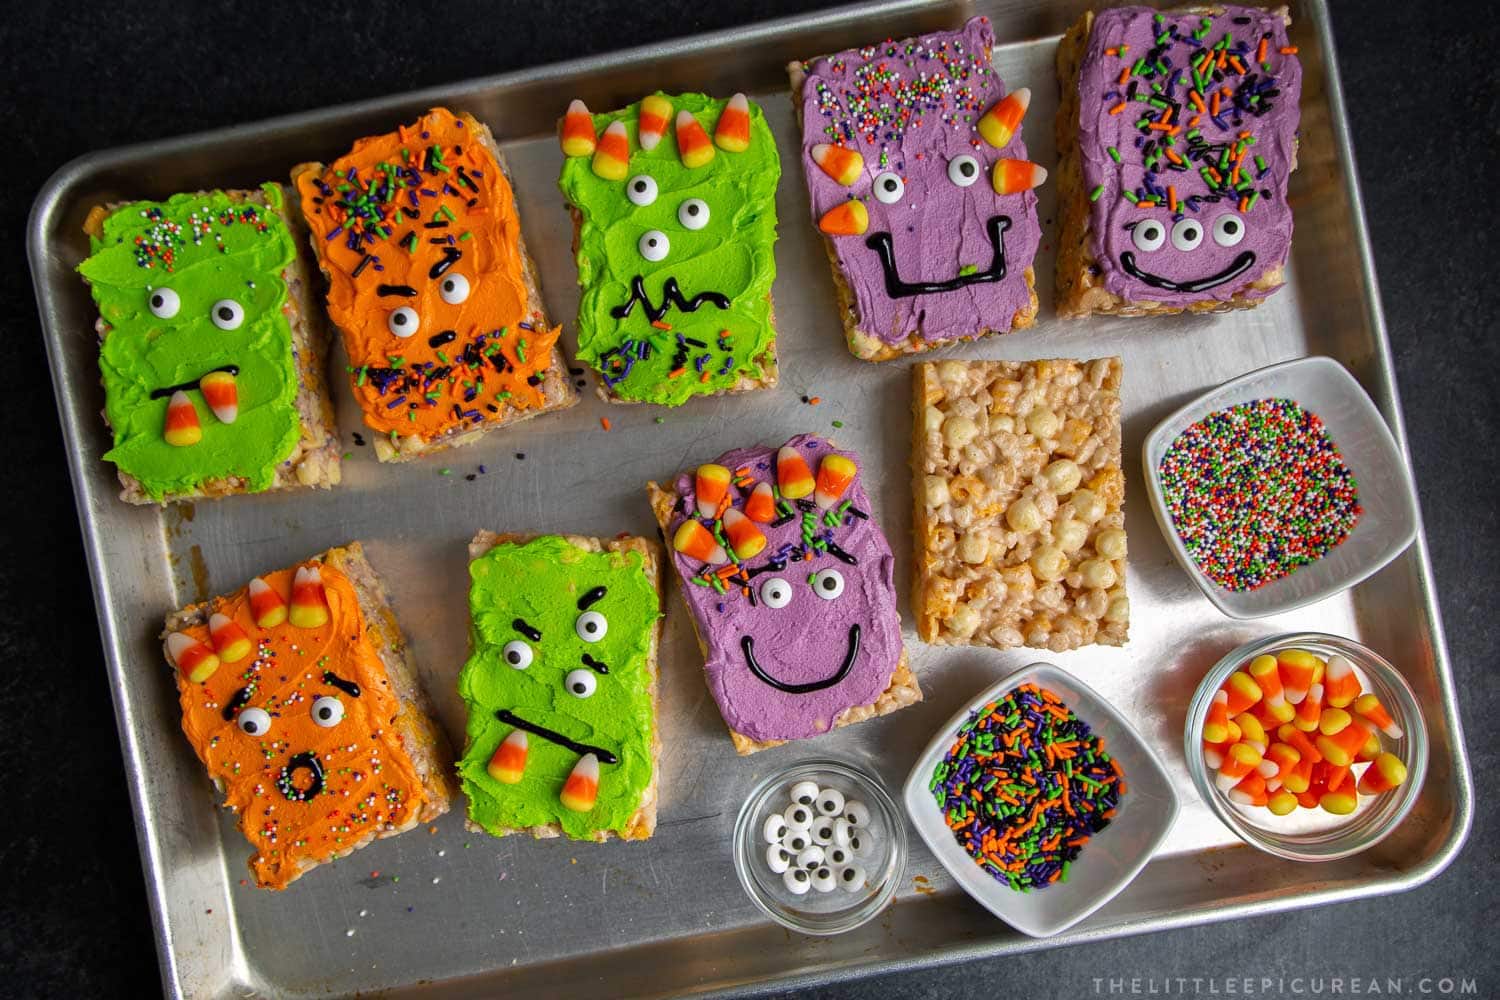 Monster Marshmallow Cereal Treats. Brown butter cereal treats frosted with buttercream and decorated with candies. It's a fun project to do with kids this Halloween!